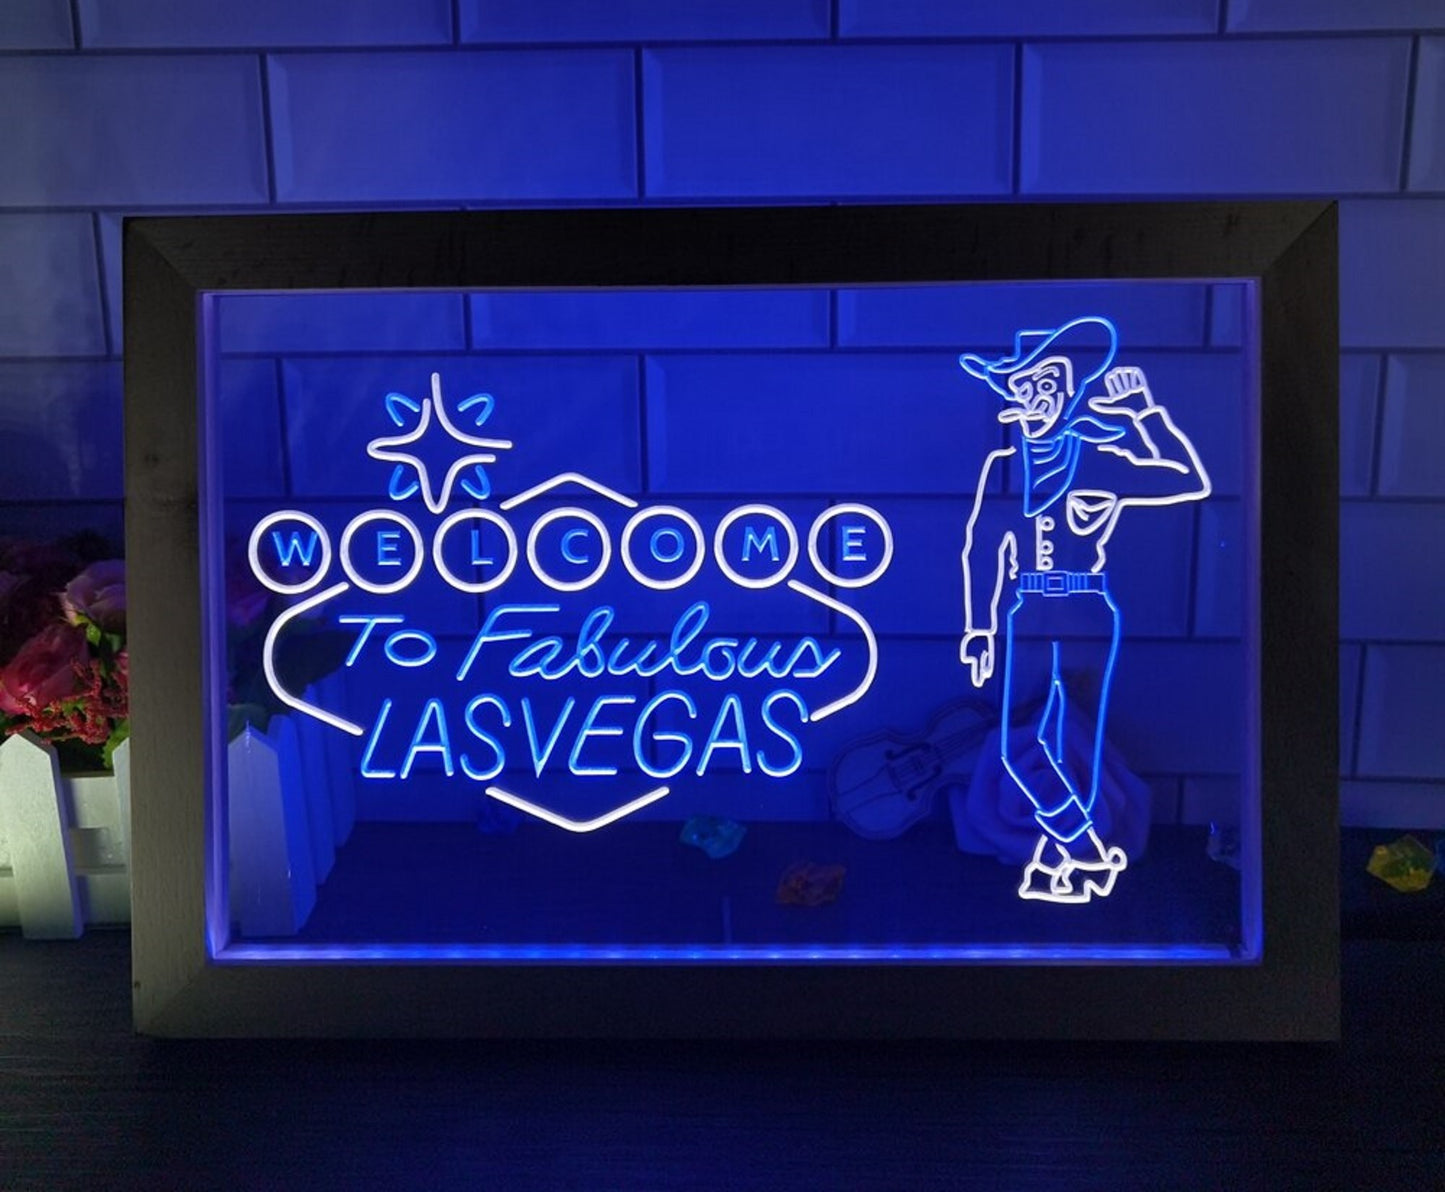 Neon Sign Framed Dual Color Cowboy Welcome To Las Vegas Wall Hanging Table Top Decor